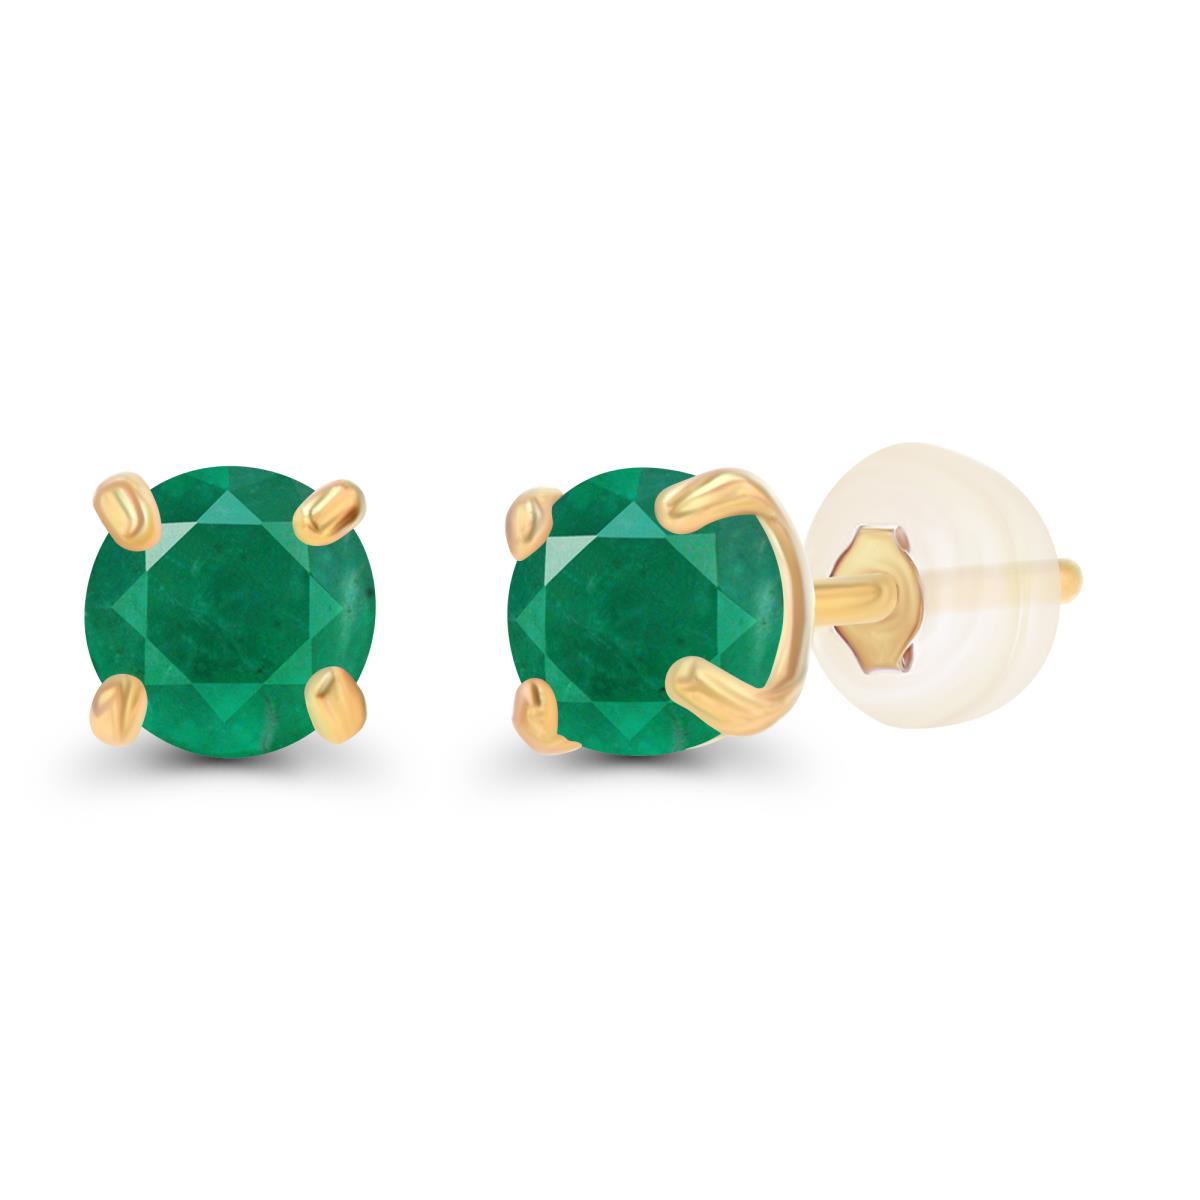 10K Yellow Gold 3mm Round Emerald Stud Earring with Silicone Back